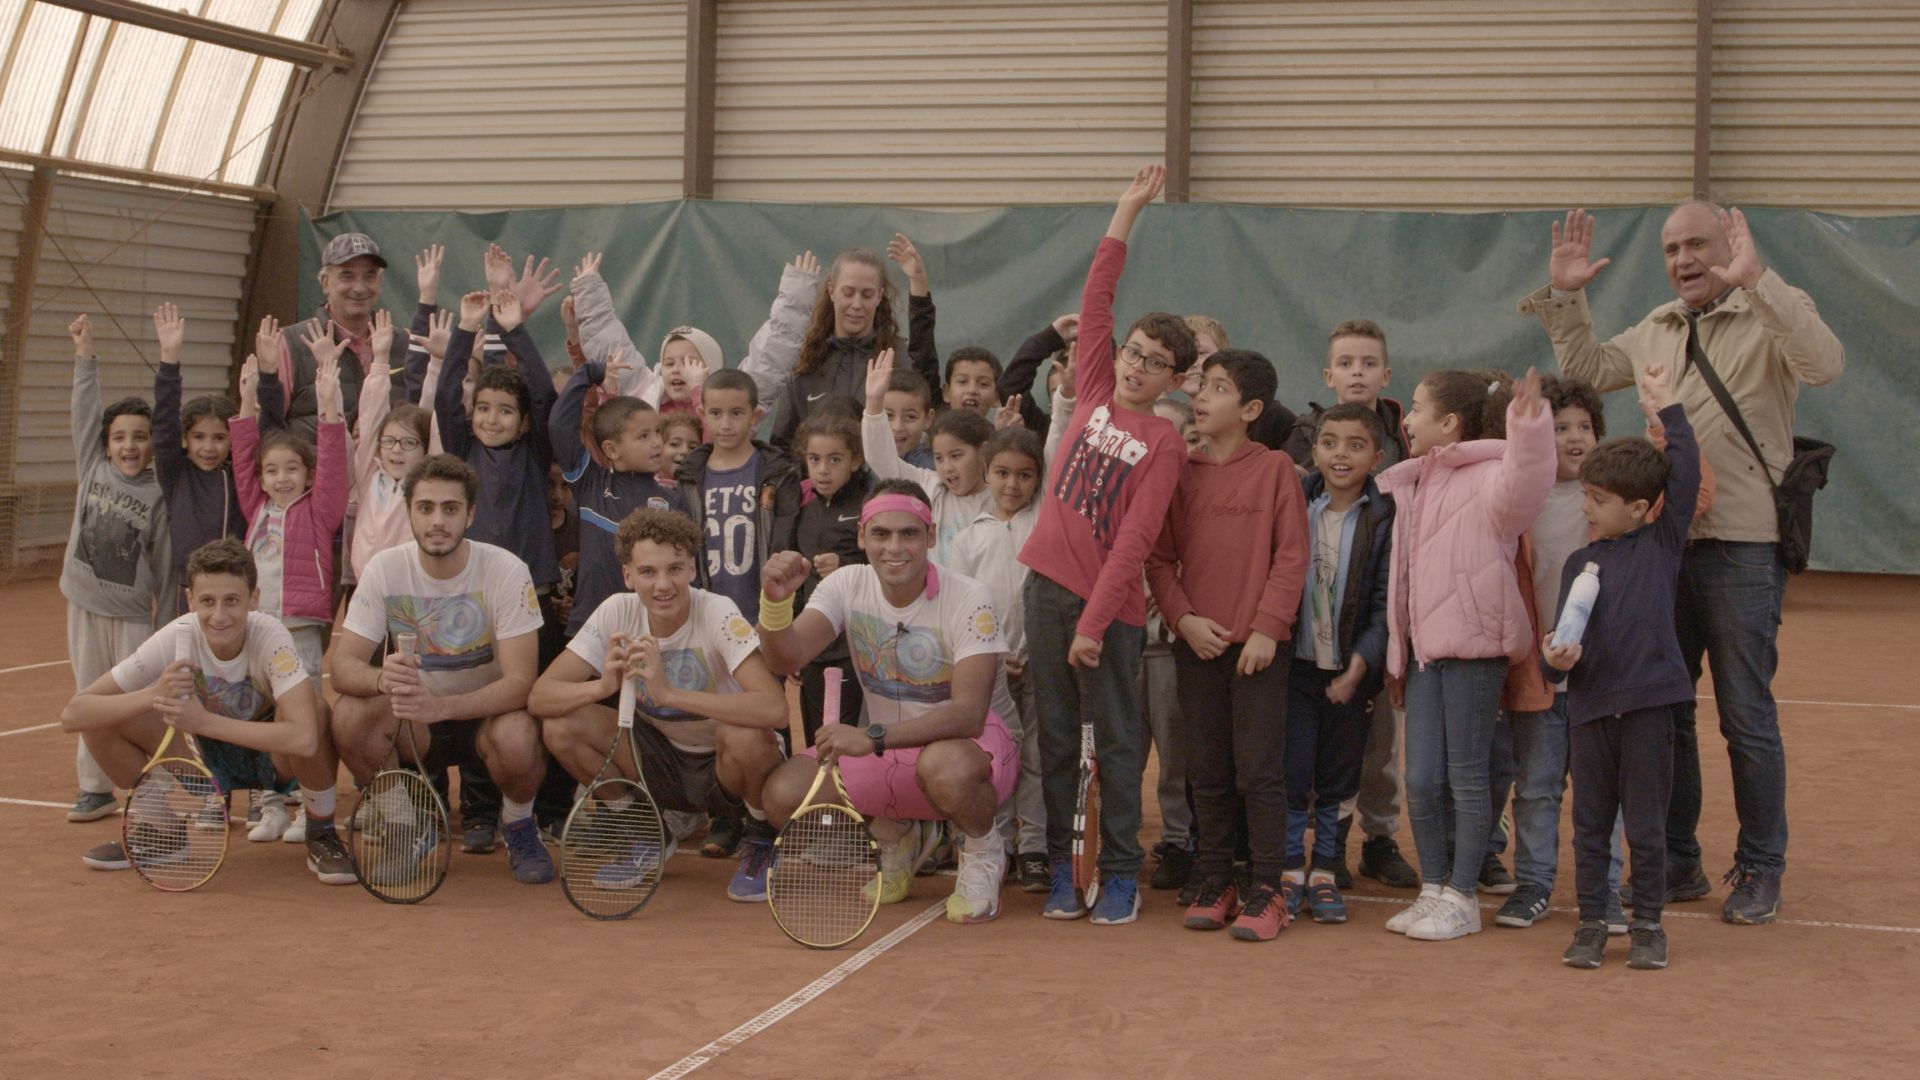 Exhibition Match and Open Tennis Session in Les Mureaux 2023